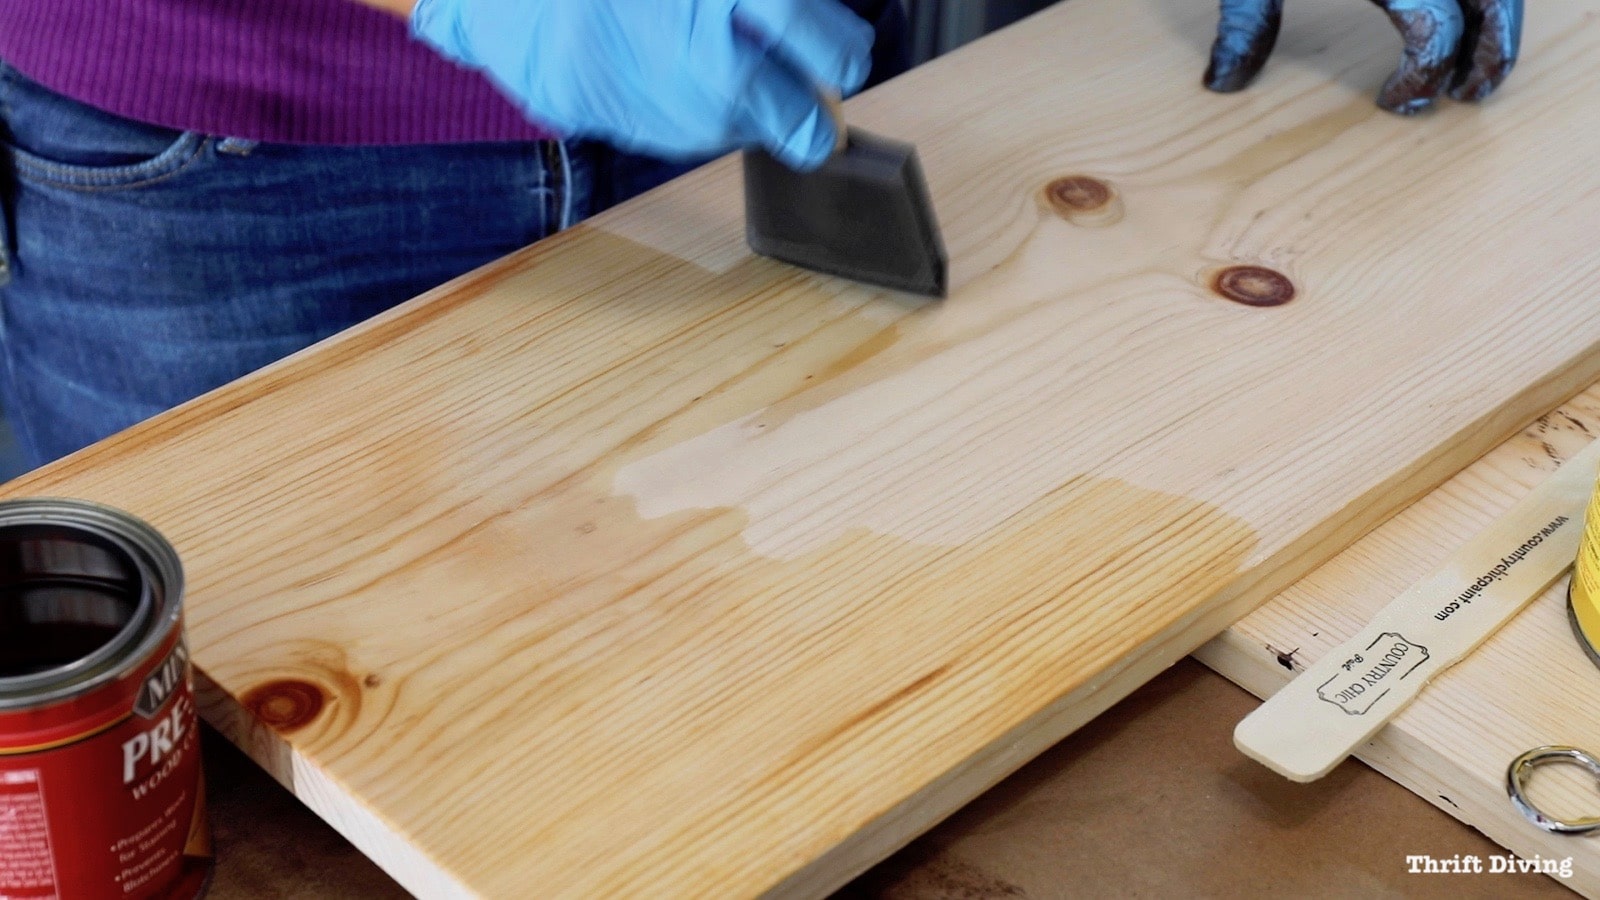 How to Build DIY Closet Shelves - Use Minwax pre-conditioner on pine boards before staining the shelves to get an even color and no blotchiness in the stain. Leave it sit for 15 minutes, wipe off, and then stain.